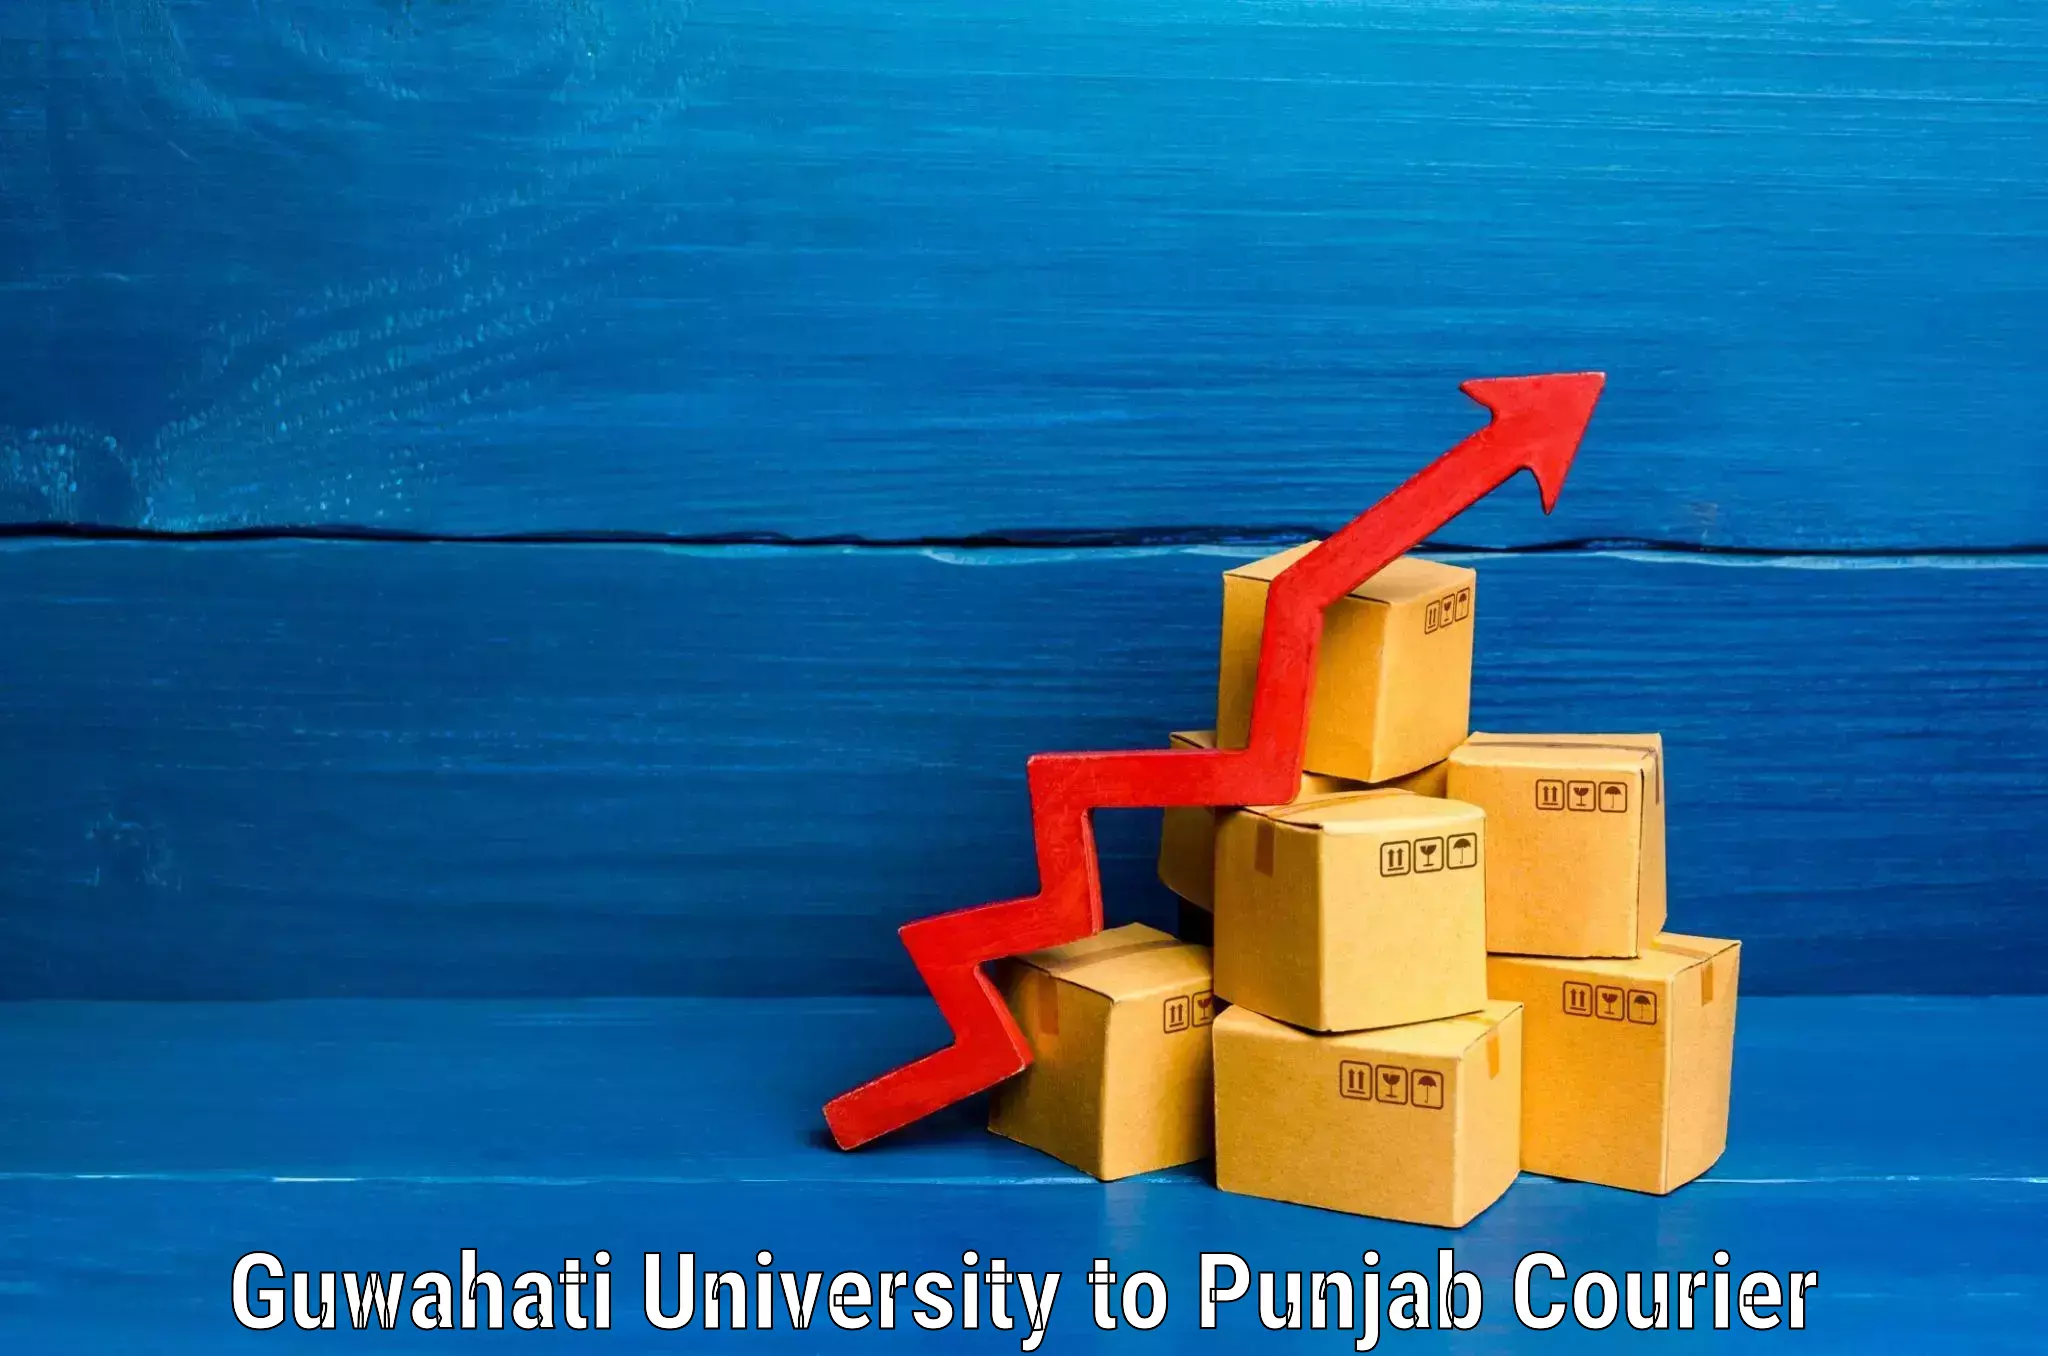 Baggage delivery solutions Guwahati University to Punjab